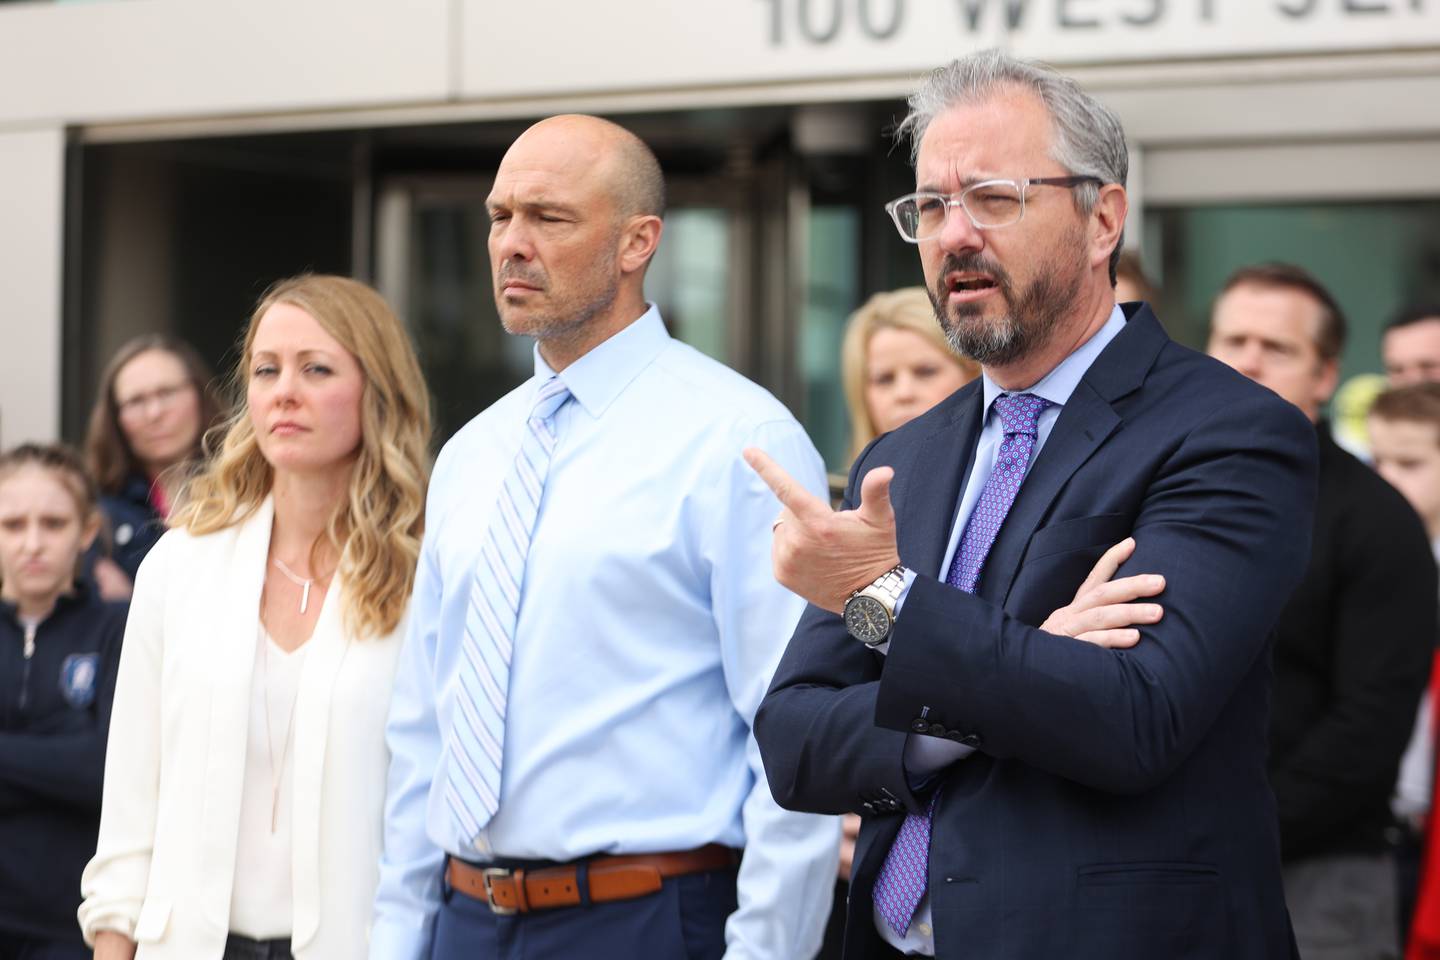 Brian Koch, right, a friend of Edward Goewey, center, speaks to the press outside Will County Courthouse during a press conference. Edward Goewey, a Will County sheriff’s deputy currently on medical leave, is being charged with disorderly conduct accusing him of disturbing Mokena school officials when he insisted on the removal of a student he believed made a shooting threat at St. Mary Catholic school. Monday, April 11, 2022, in Joliet.